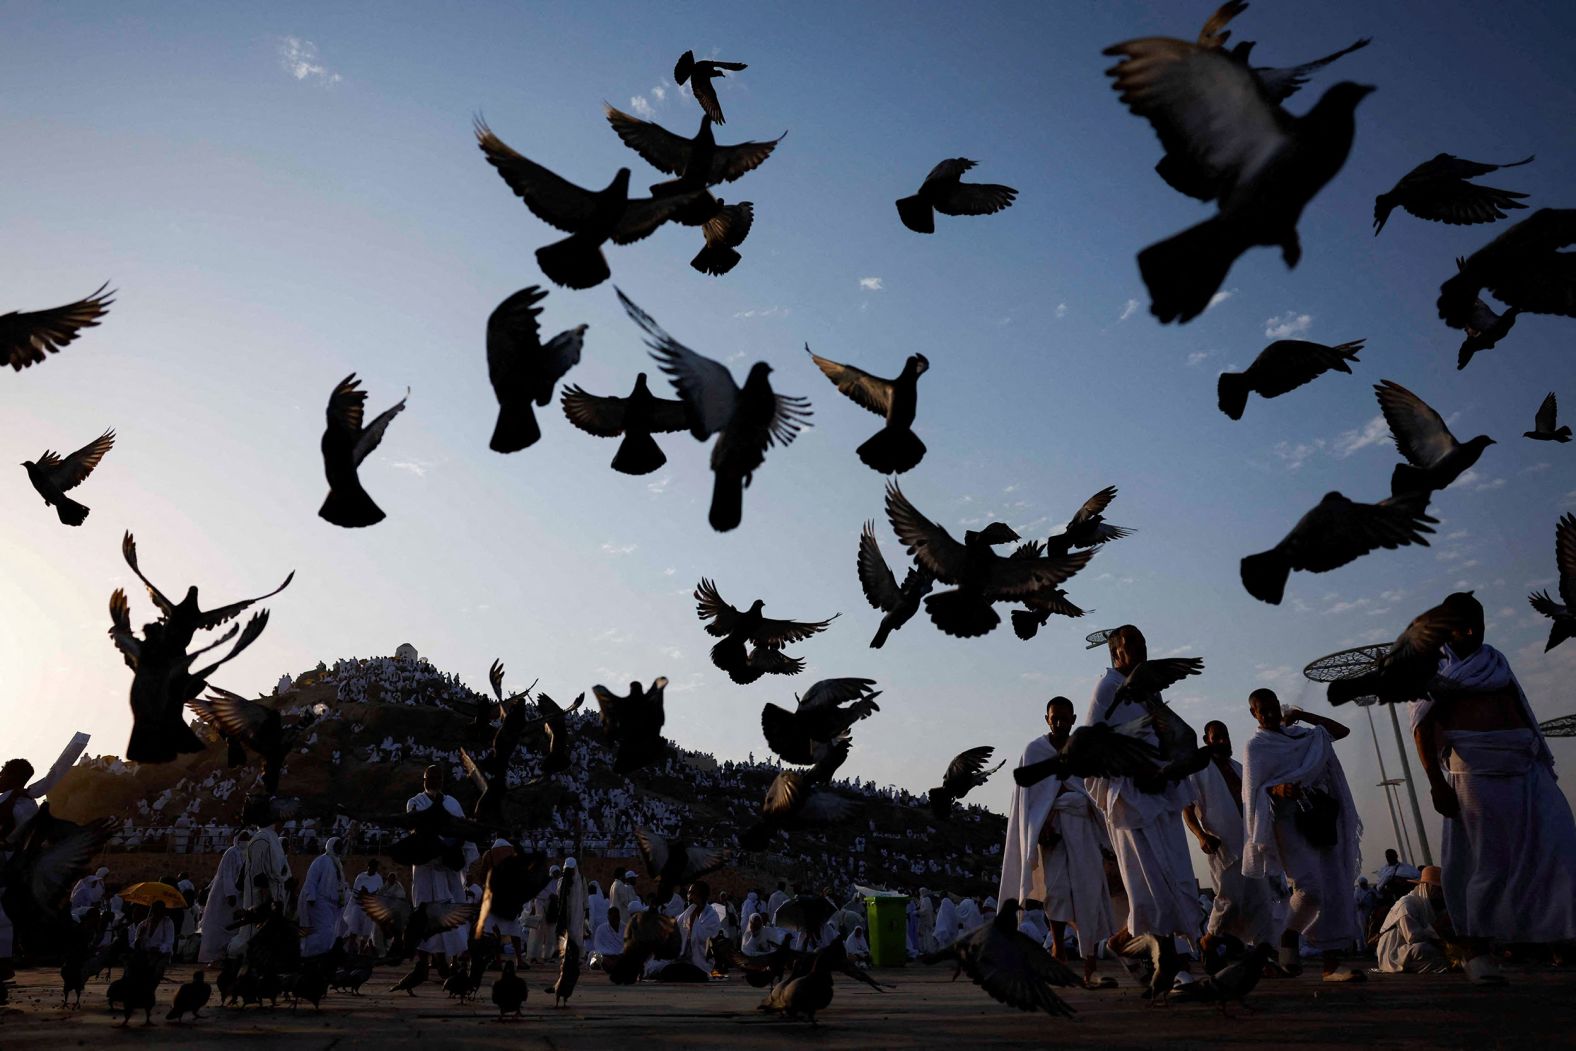 Muslims taking part in the annual Hajj pilgrimage gather at the Mount of Mercy, on the plain of Arafat outside the holy city of Mecca, Saudi Arabia, on Saturday, June 15.